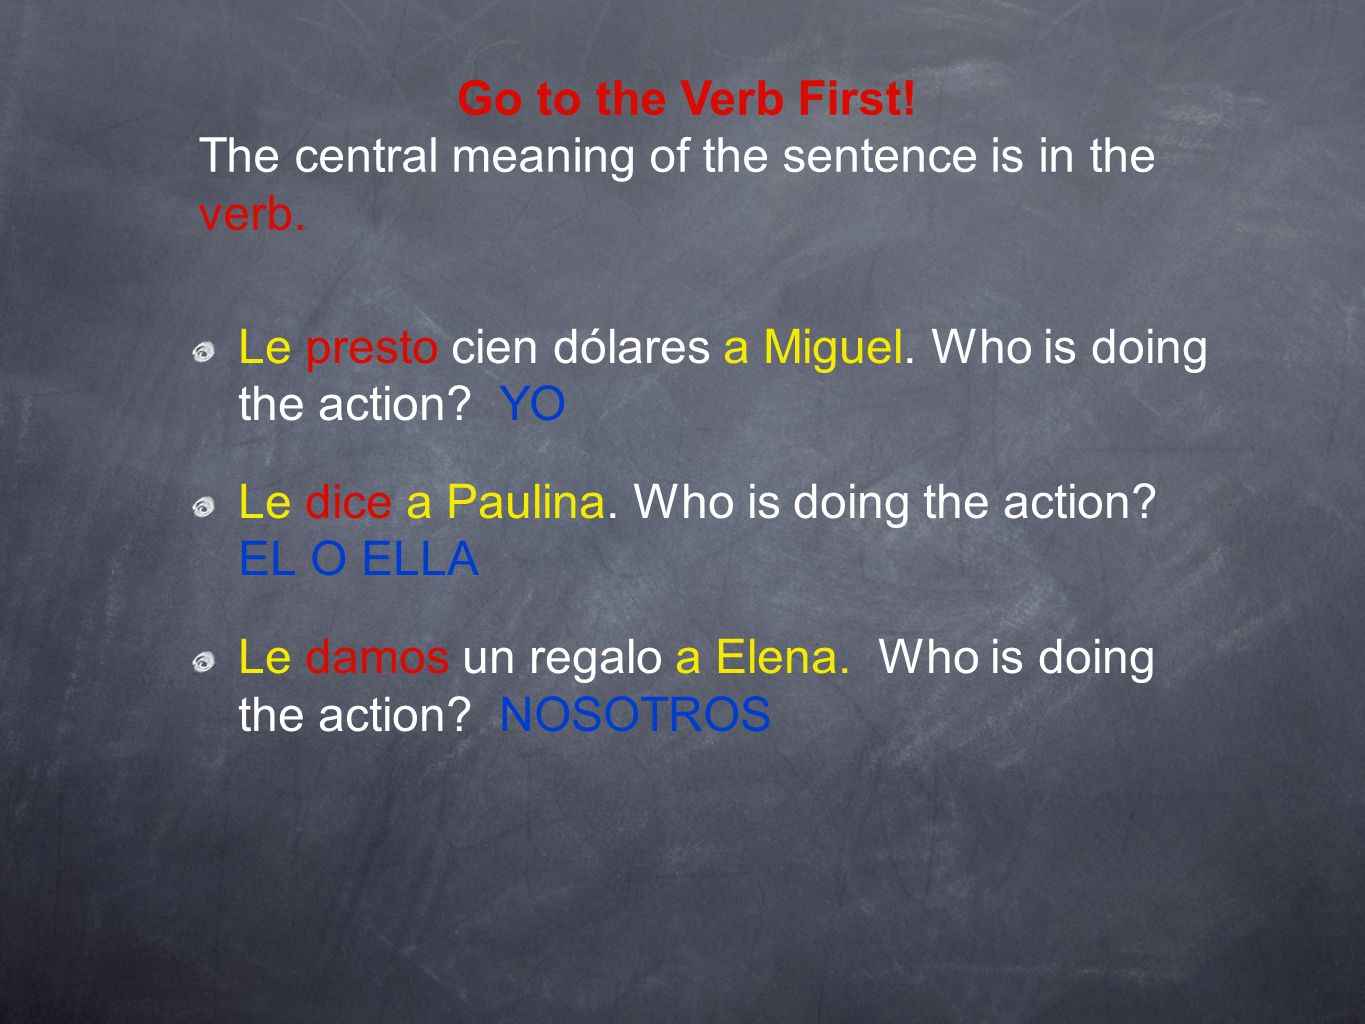 Go to the Verb First! The central meaning of the sentence is in the verb. Le presto cien dólares a Miguel. Who is doing the action YO.